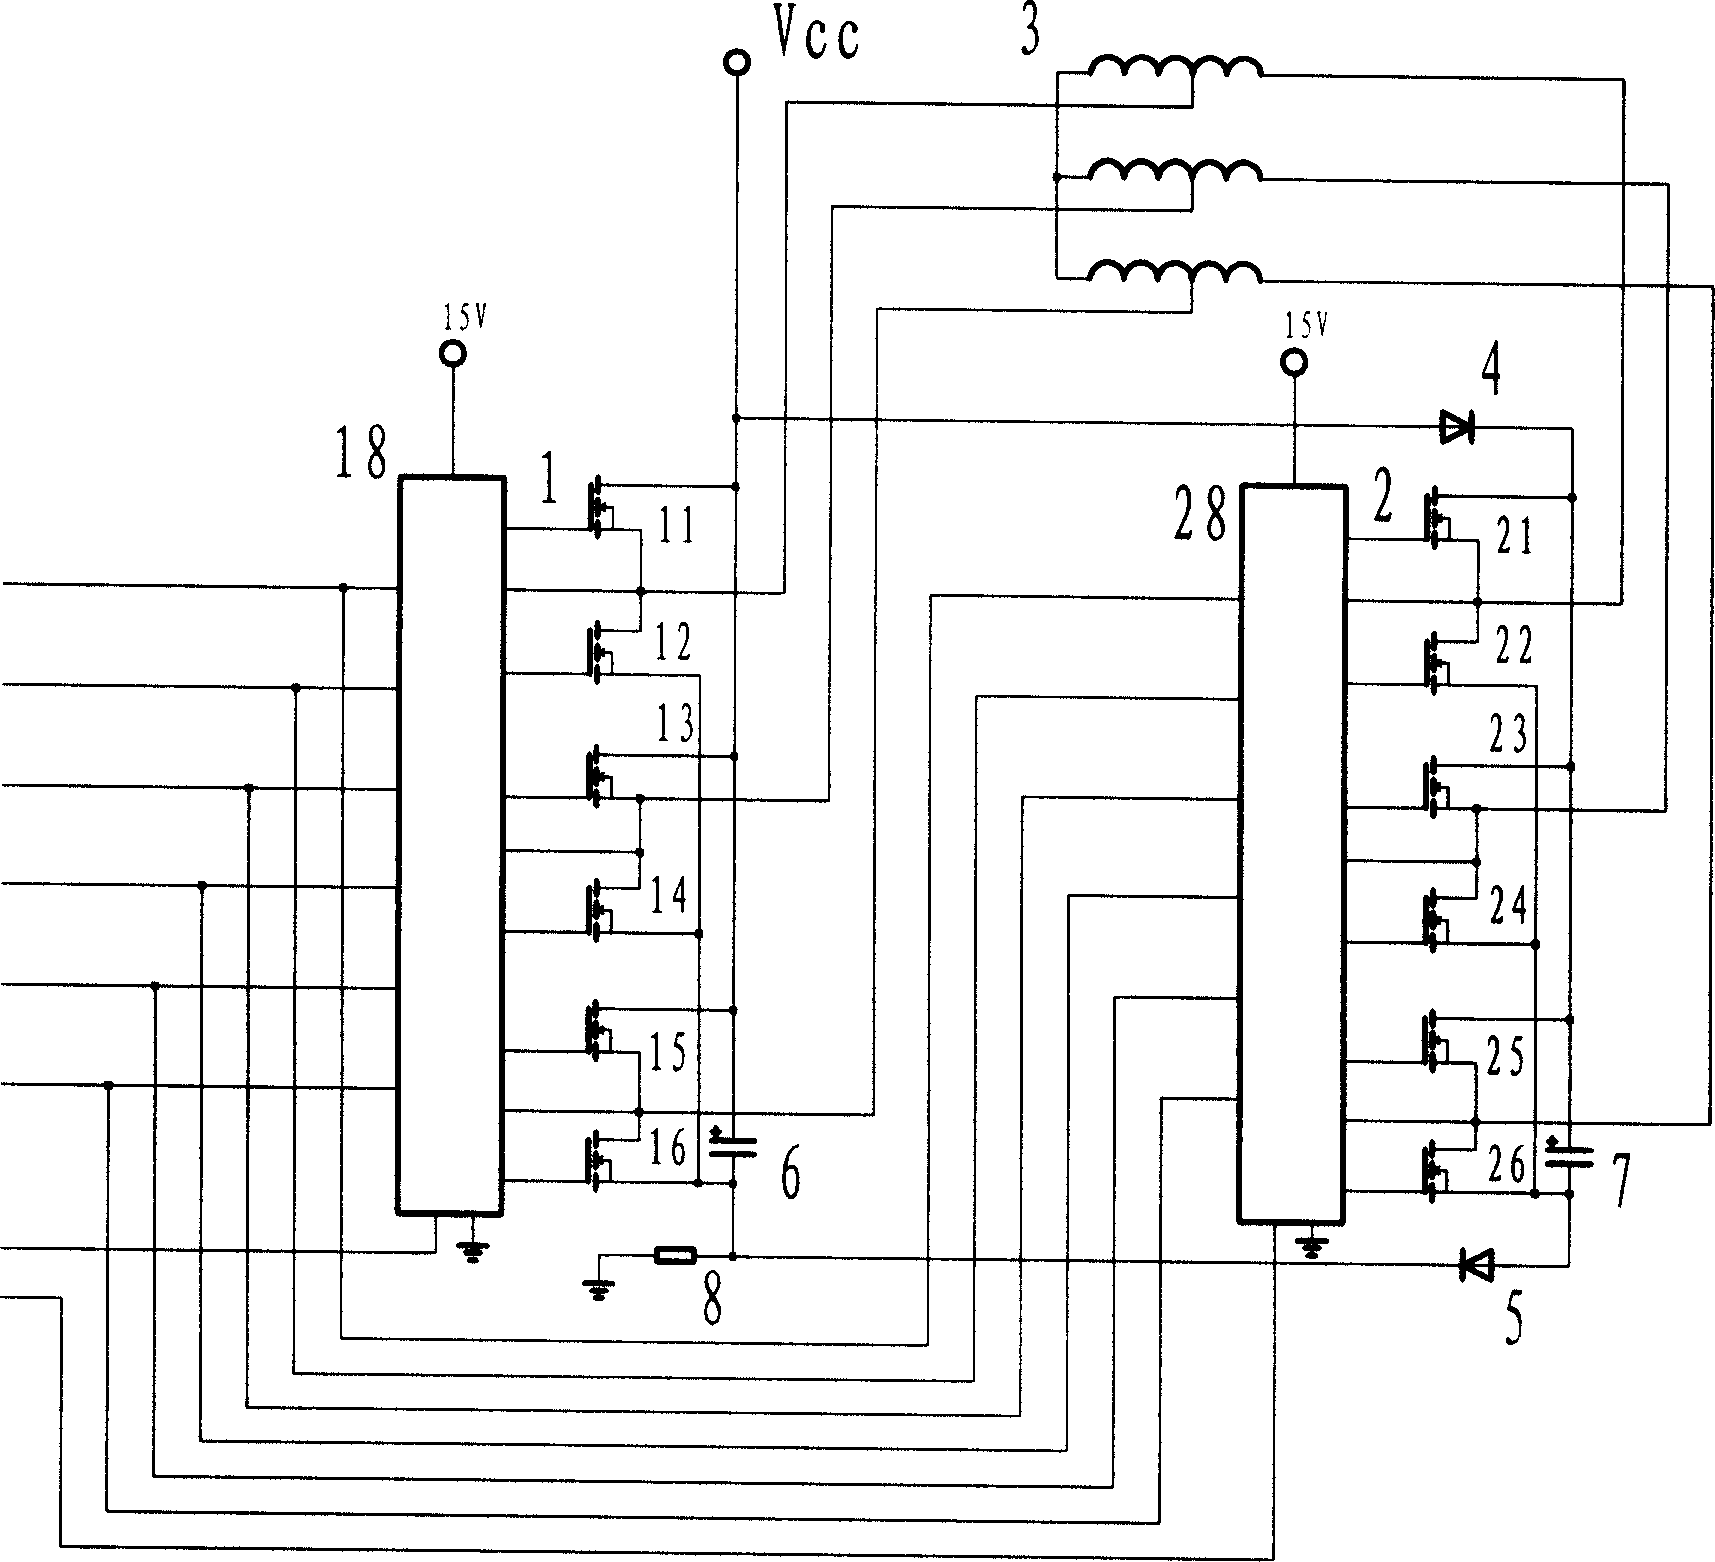 Driving plan of parallel multi-section contactless switch speed regulating machine